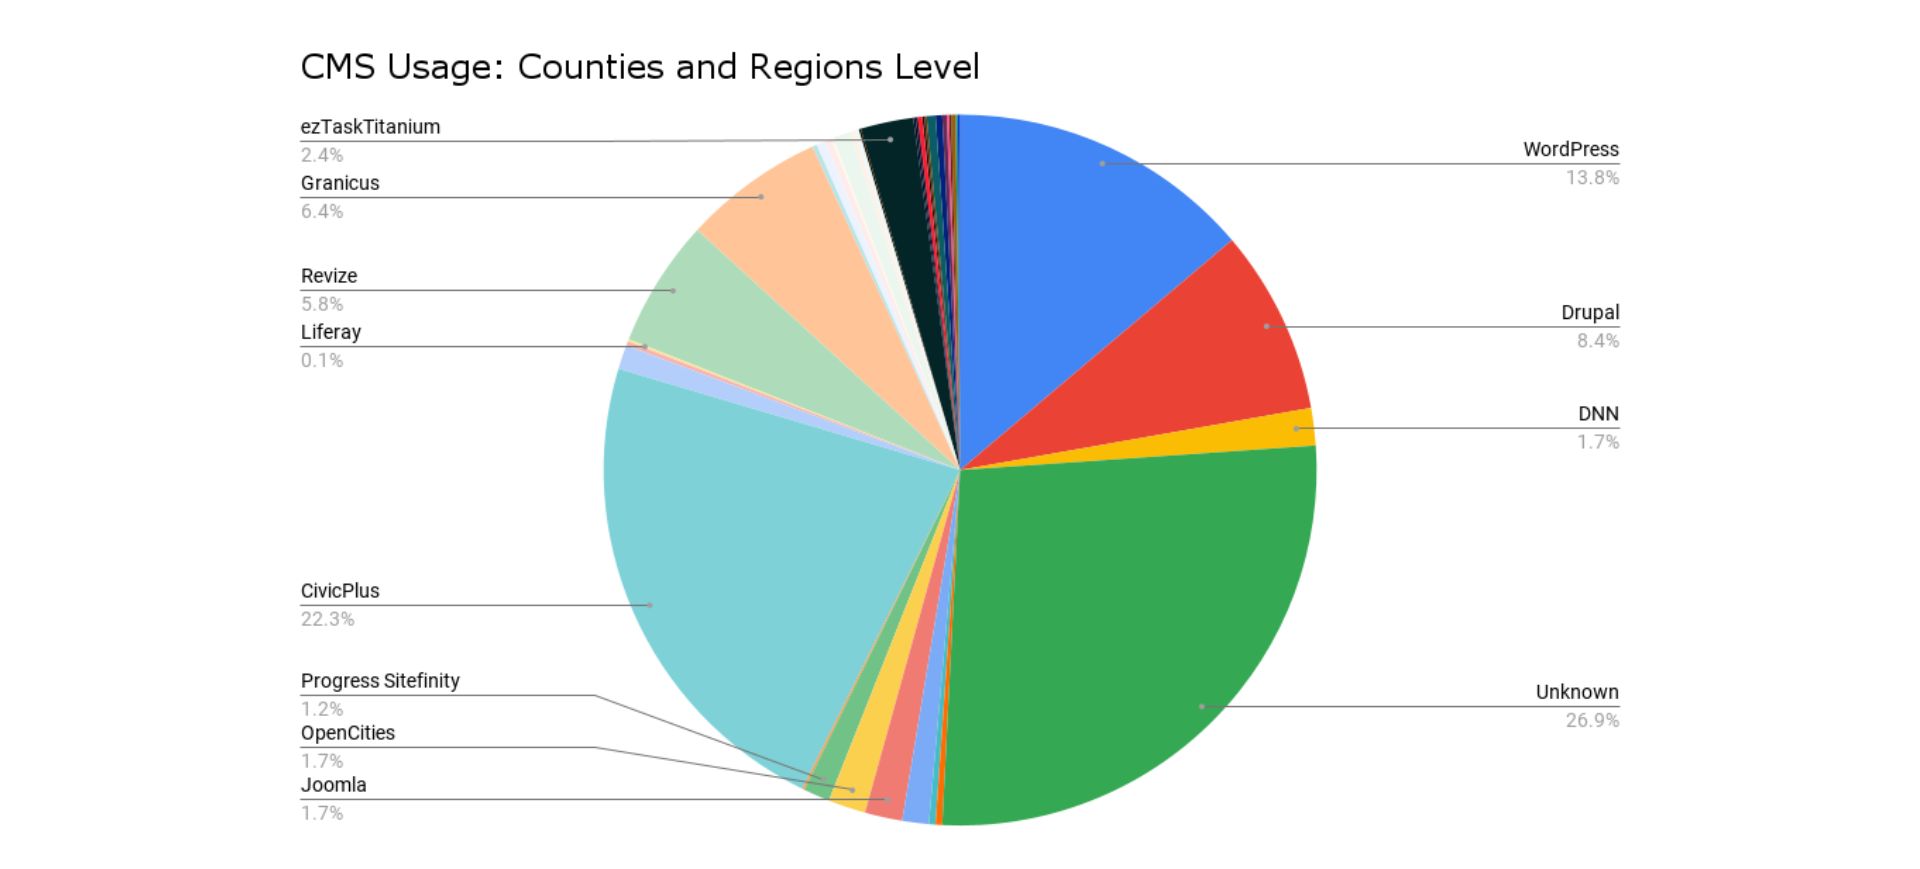 cms usage: counties and regions level